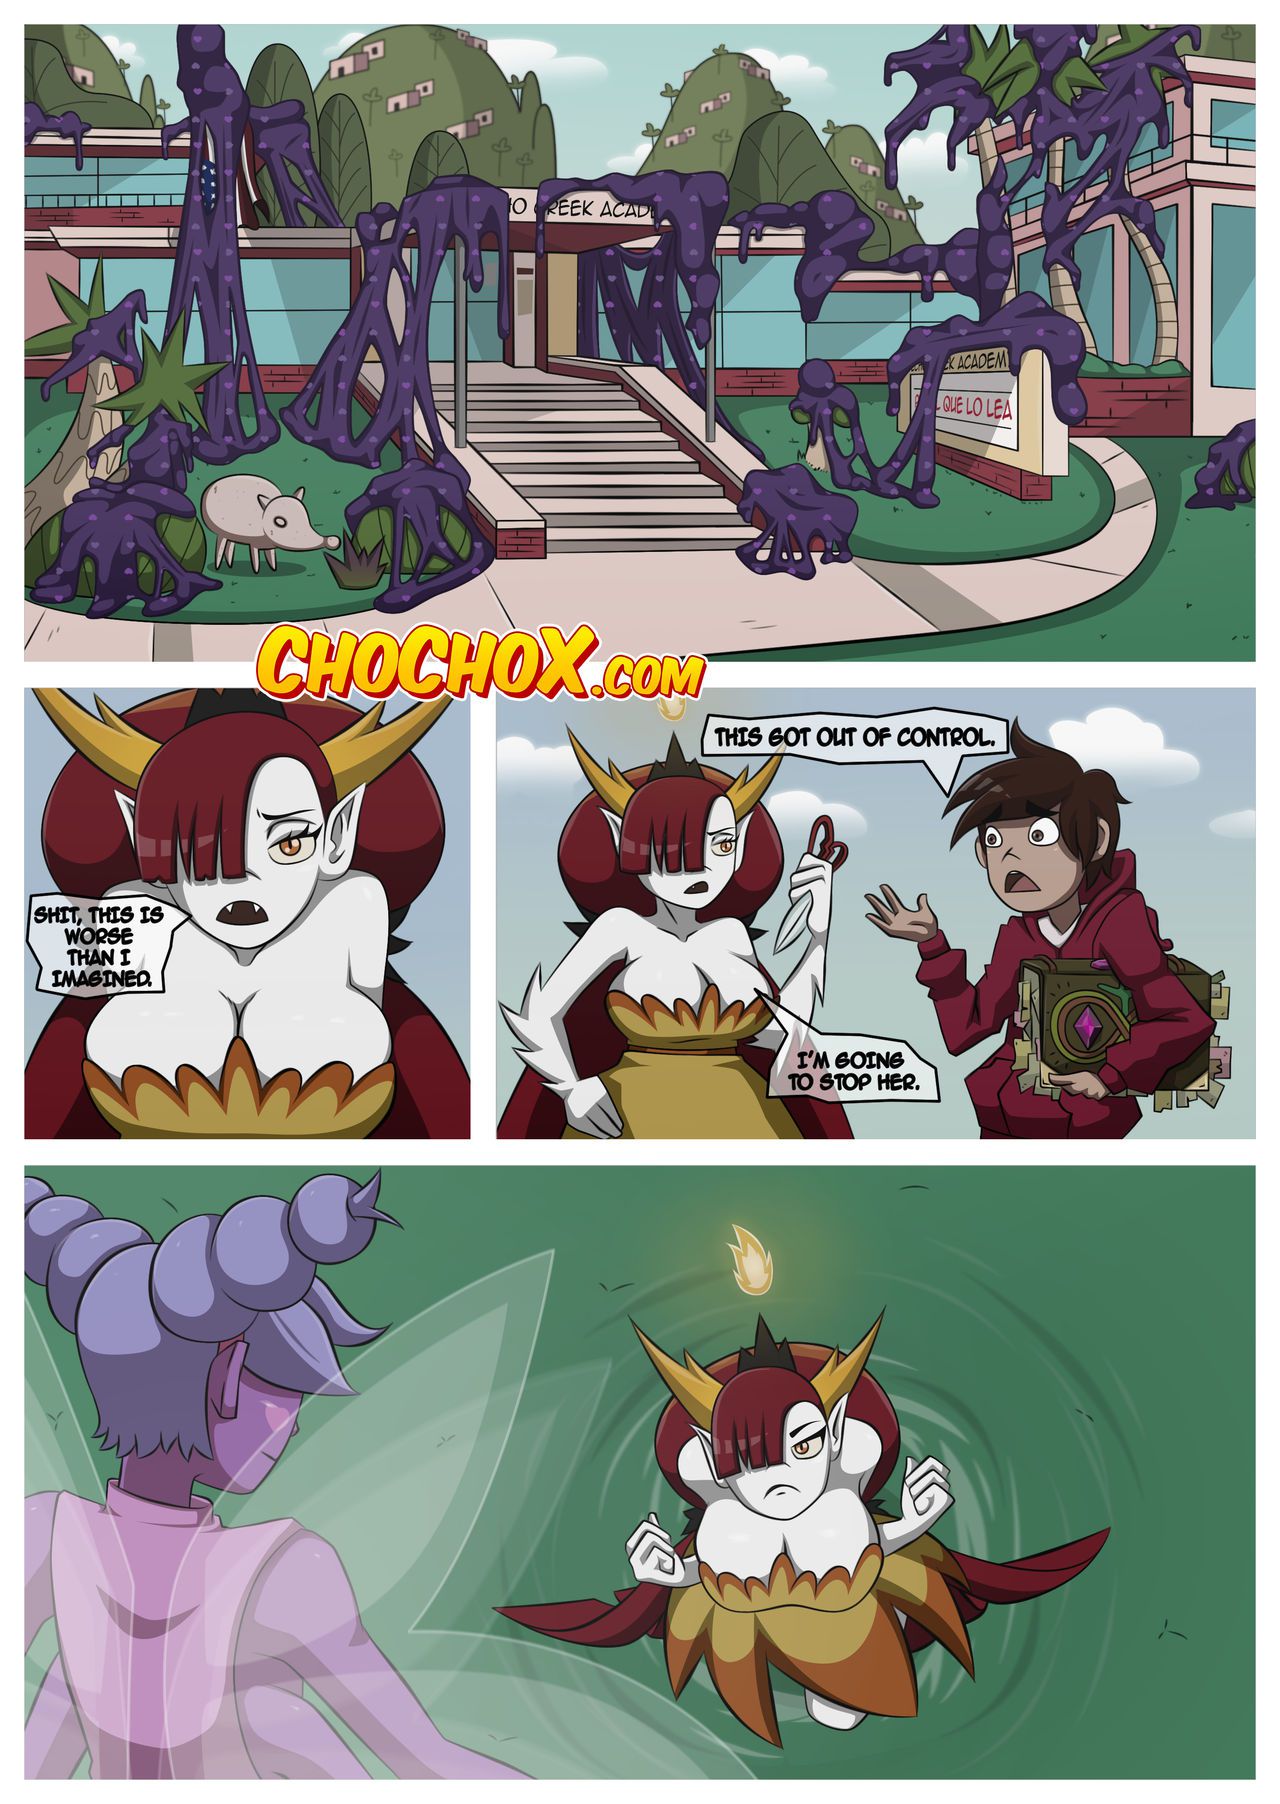 [Crock Comix] Hekapoo Plan’s - Sexberty 1 [ChoChoX] (Star Vs. The Forces of Evil) 6